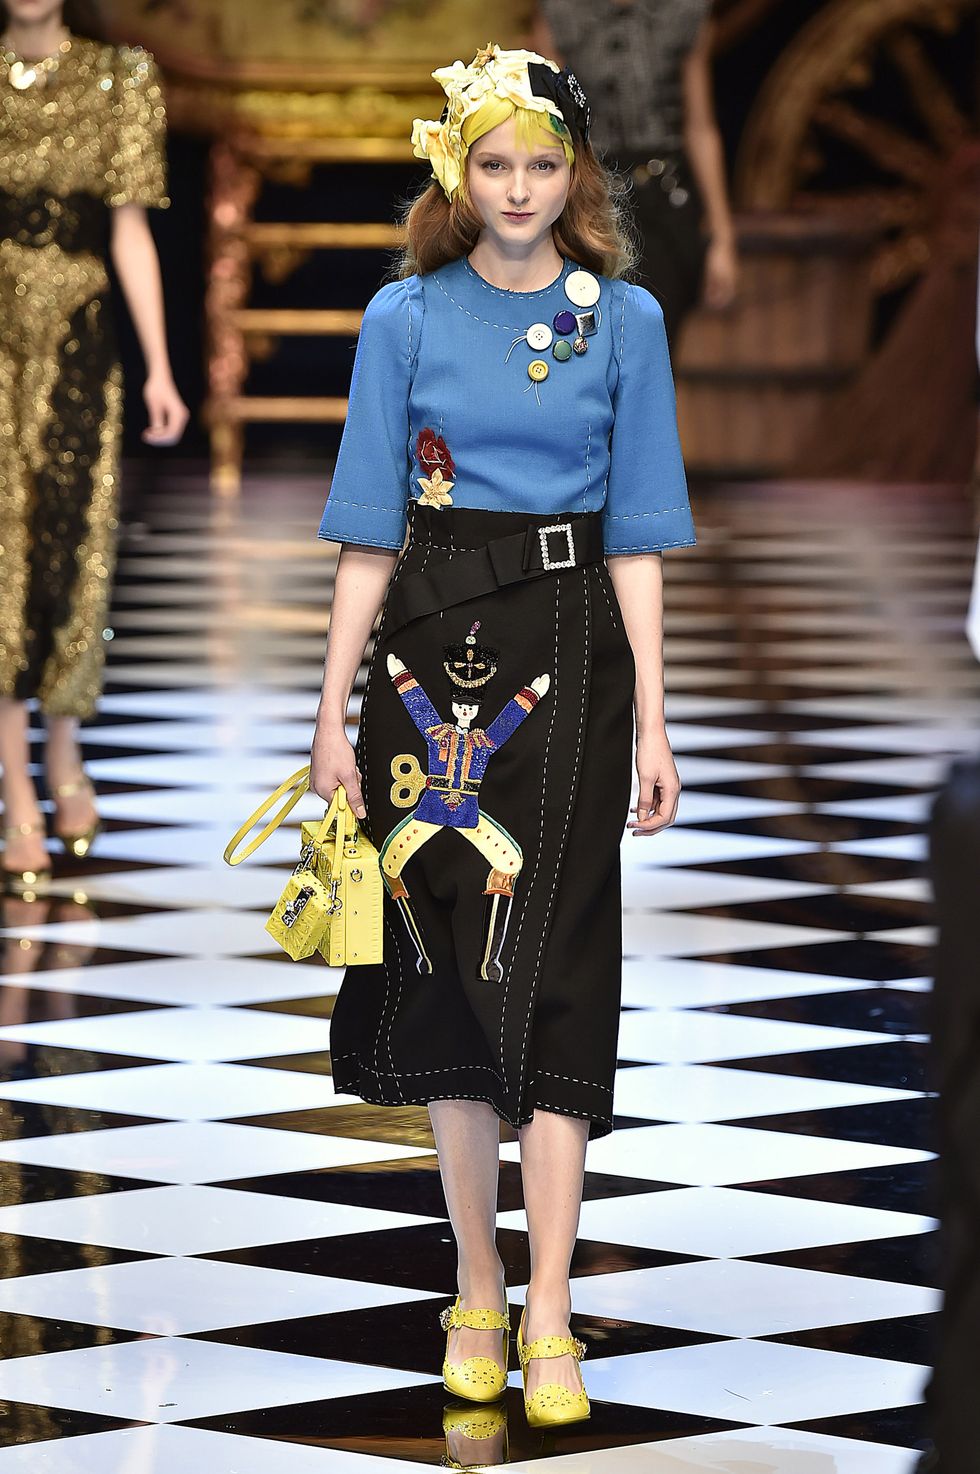 Dolce & Gabbana Literally Brought Disney Fairy Tales to Life on the Runway